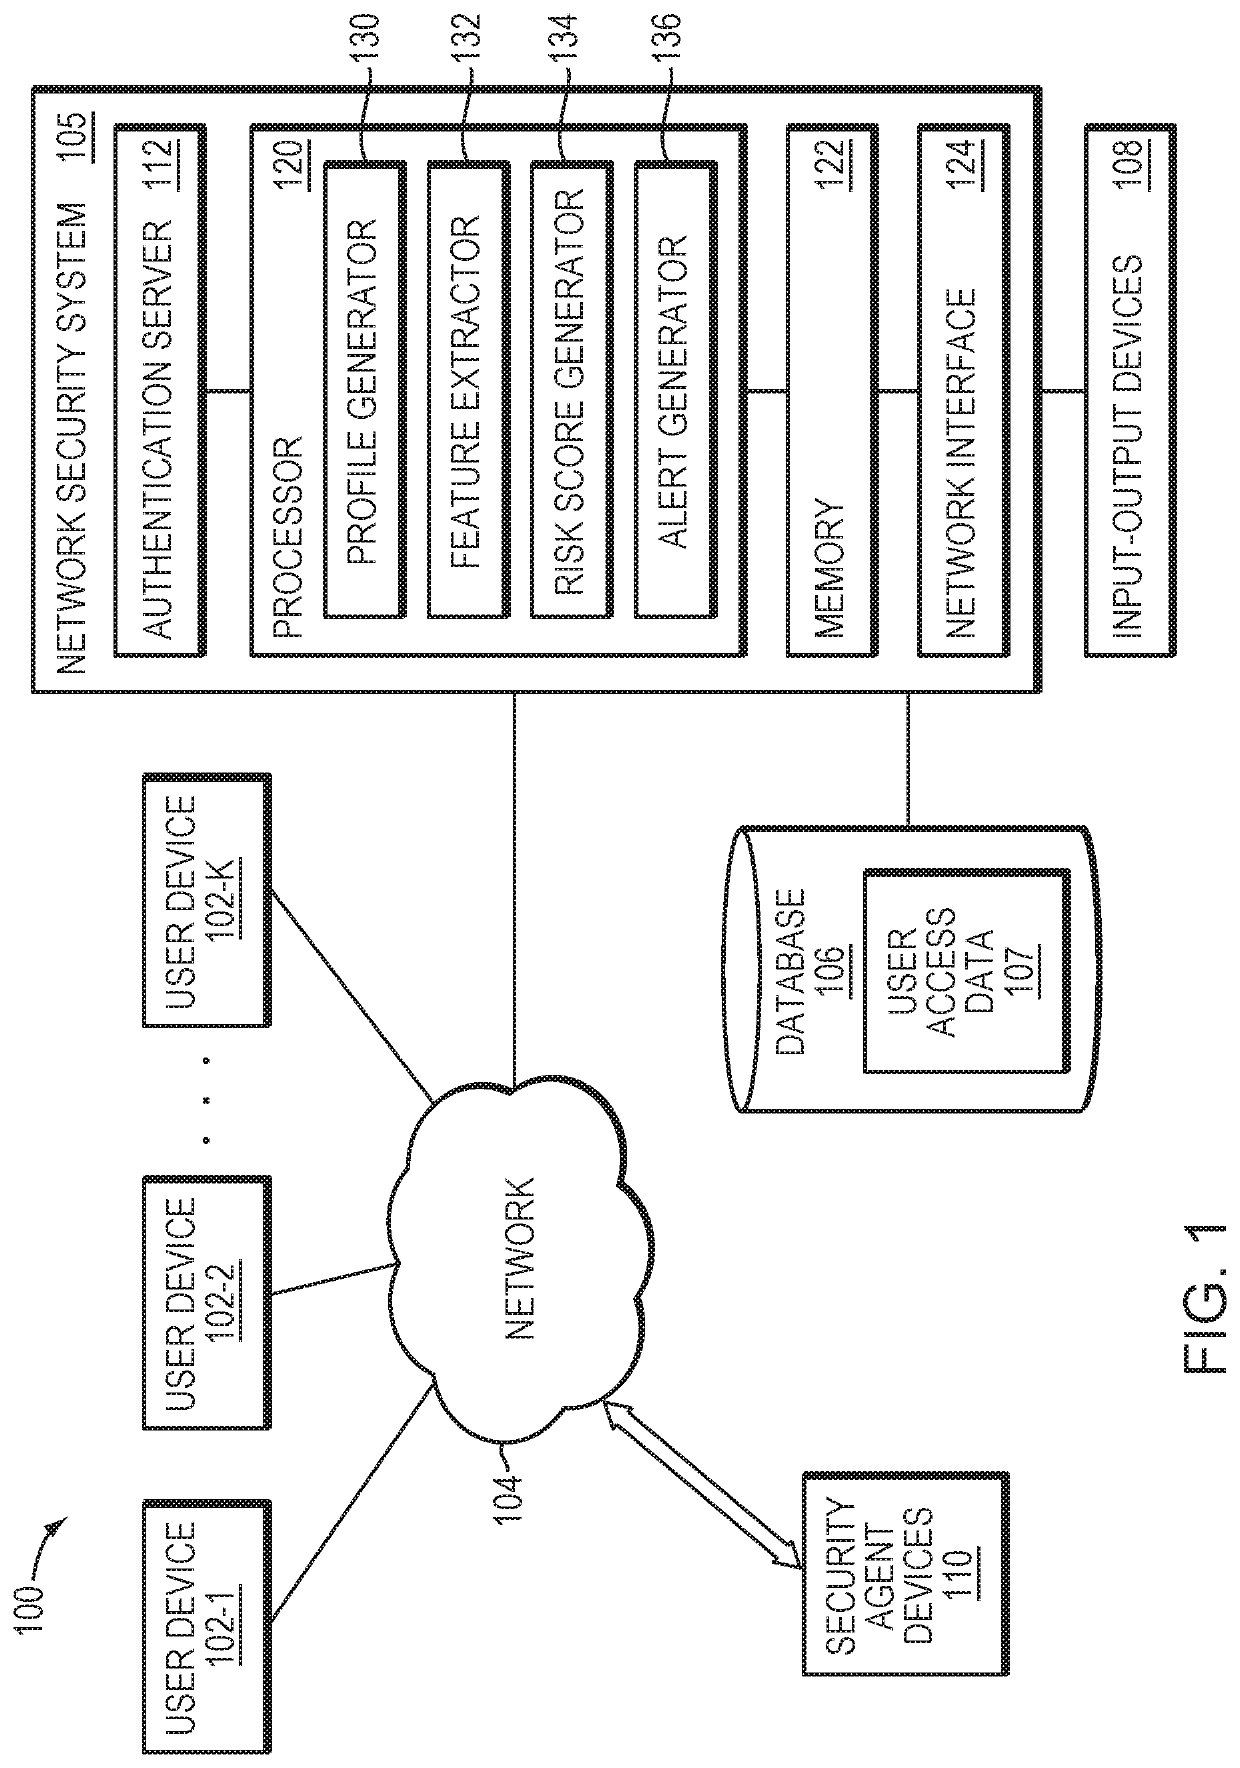 Method, apparatus and non-transitory processor-readable storage medium for providing security in a computer network